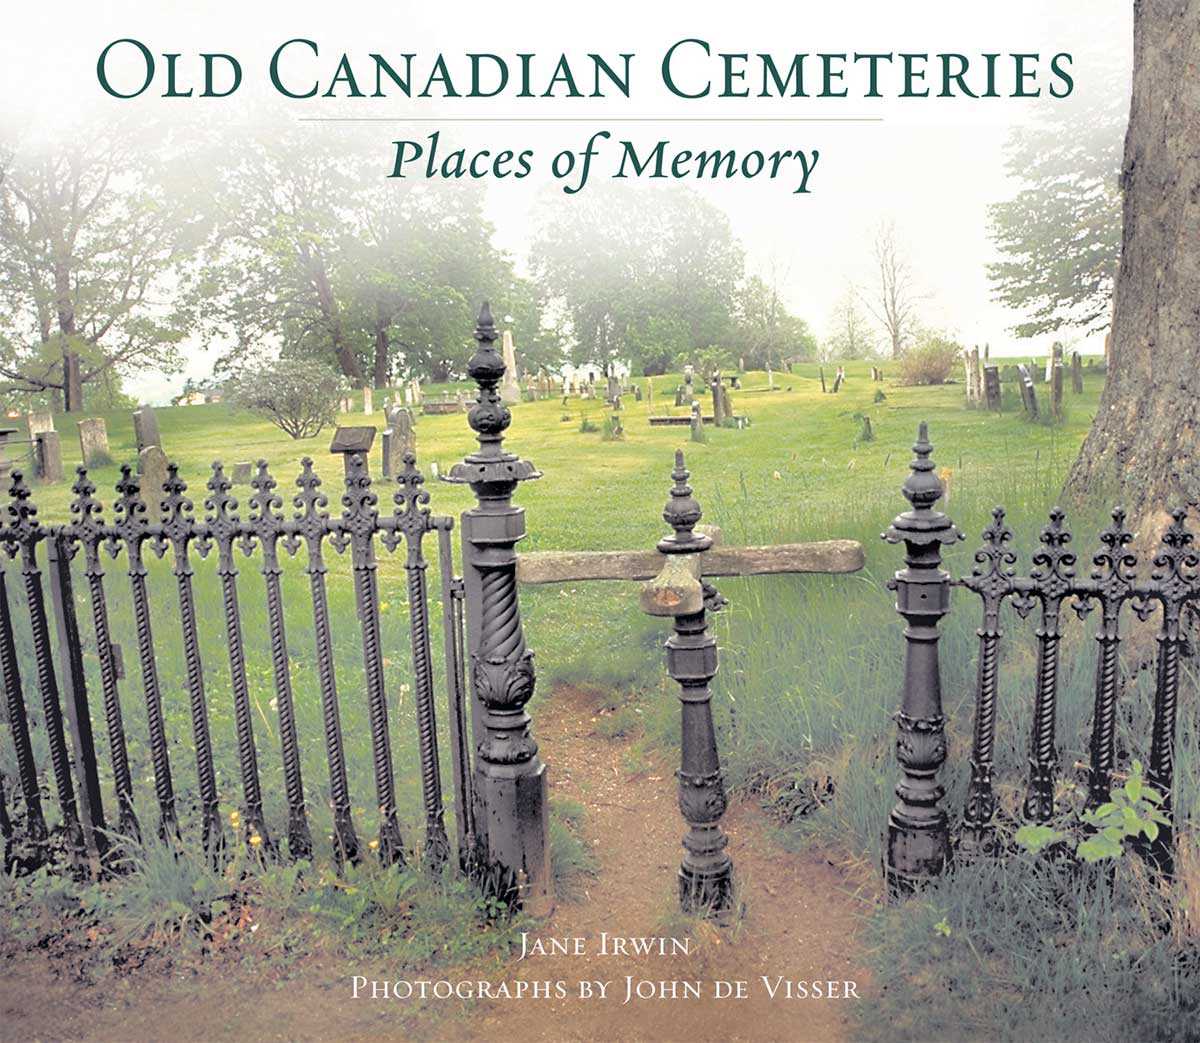 Old Canadian Cemeteries: Places of Memory